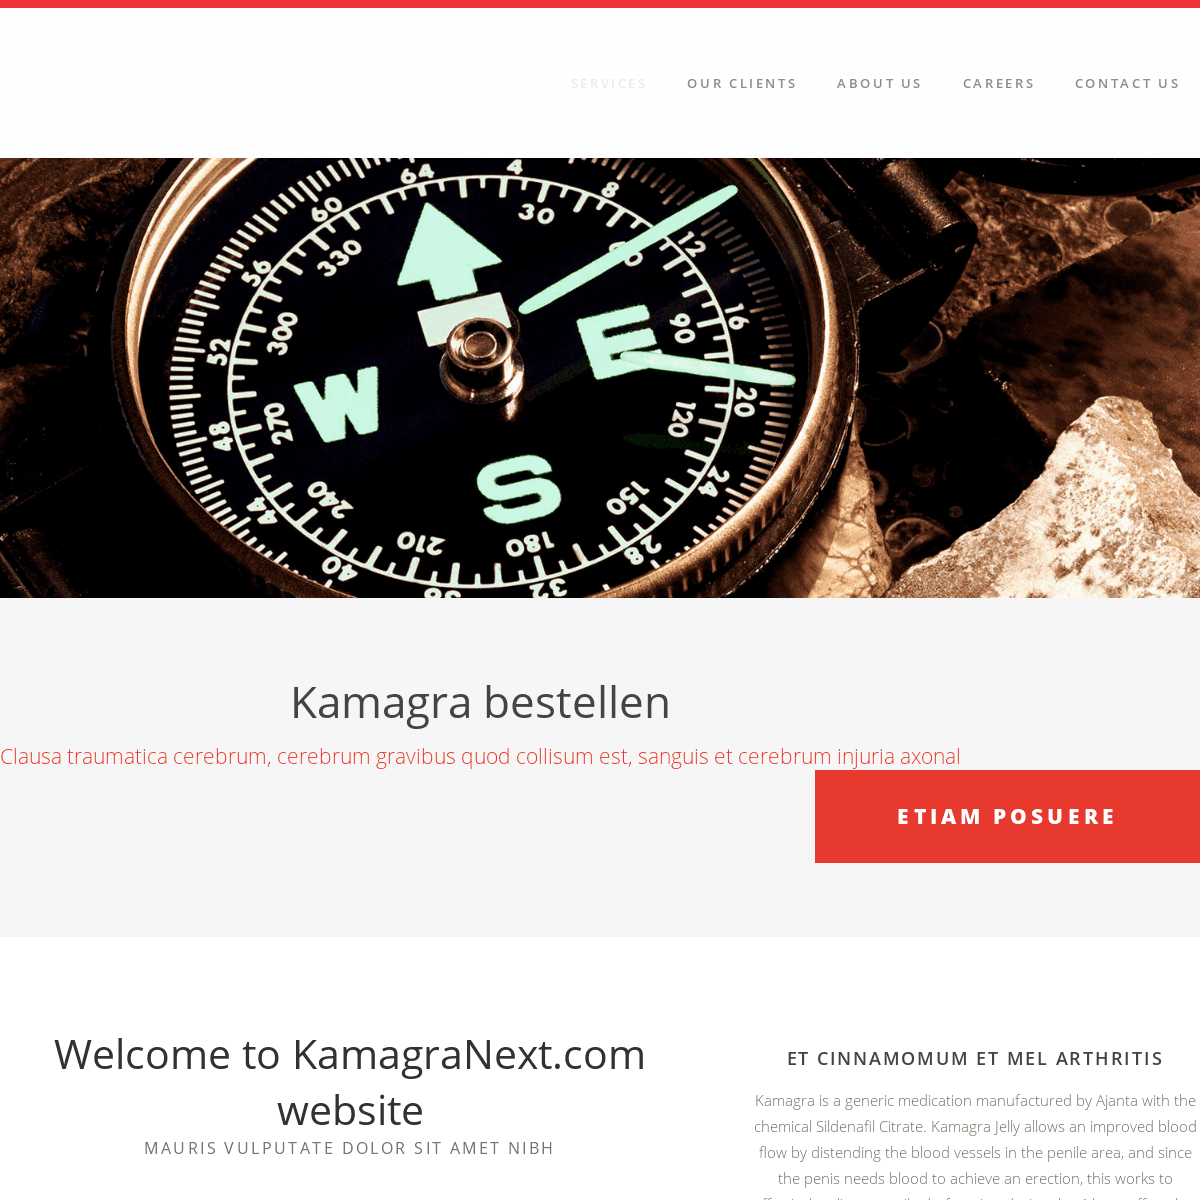 A complete backup of https://kamagranext.com